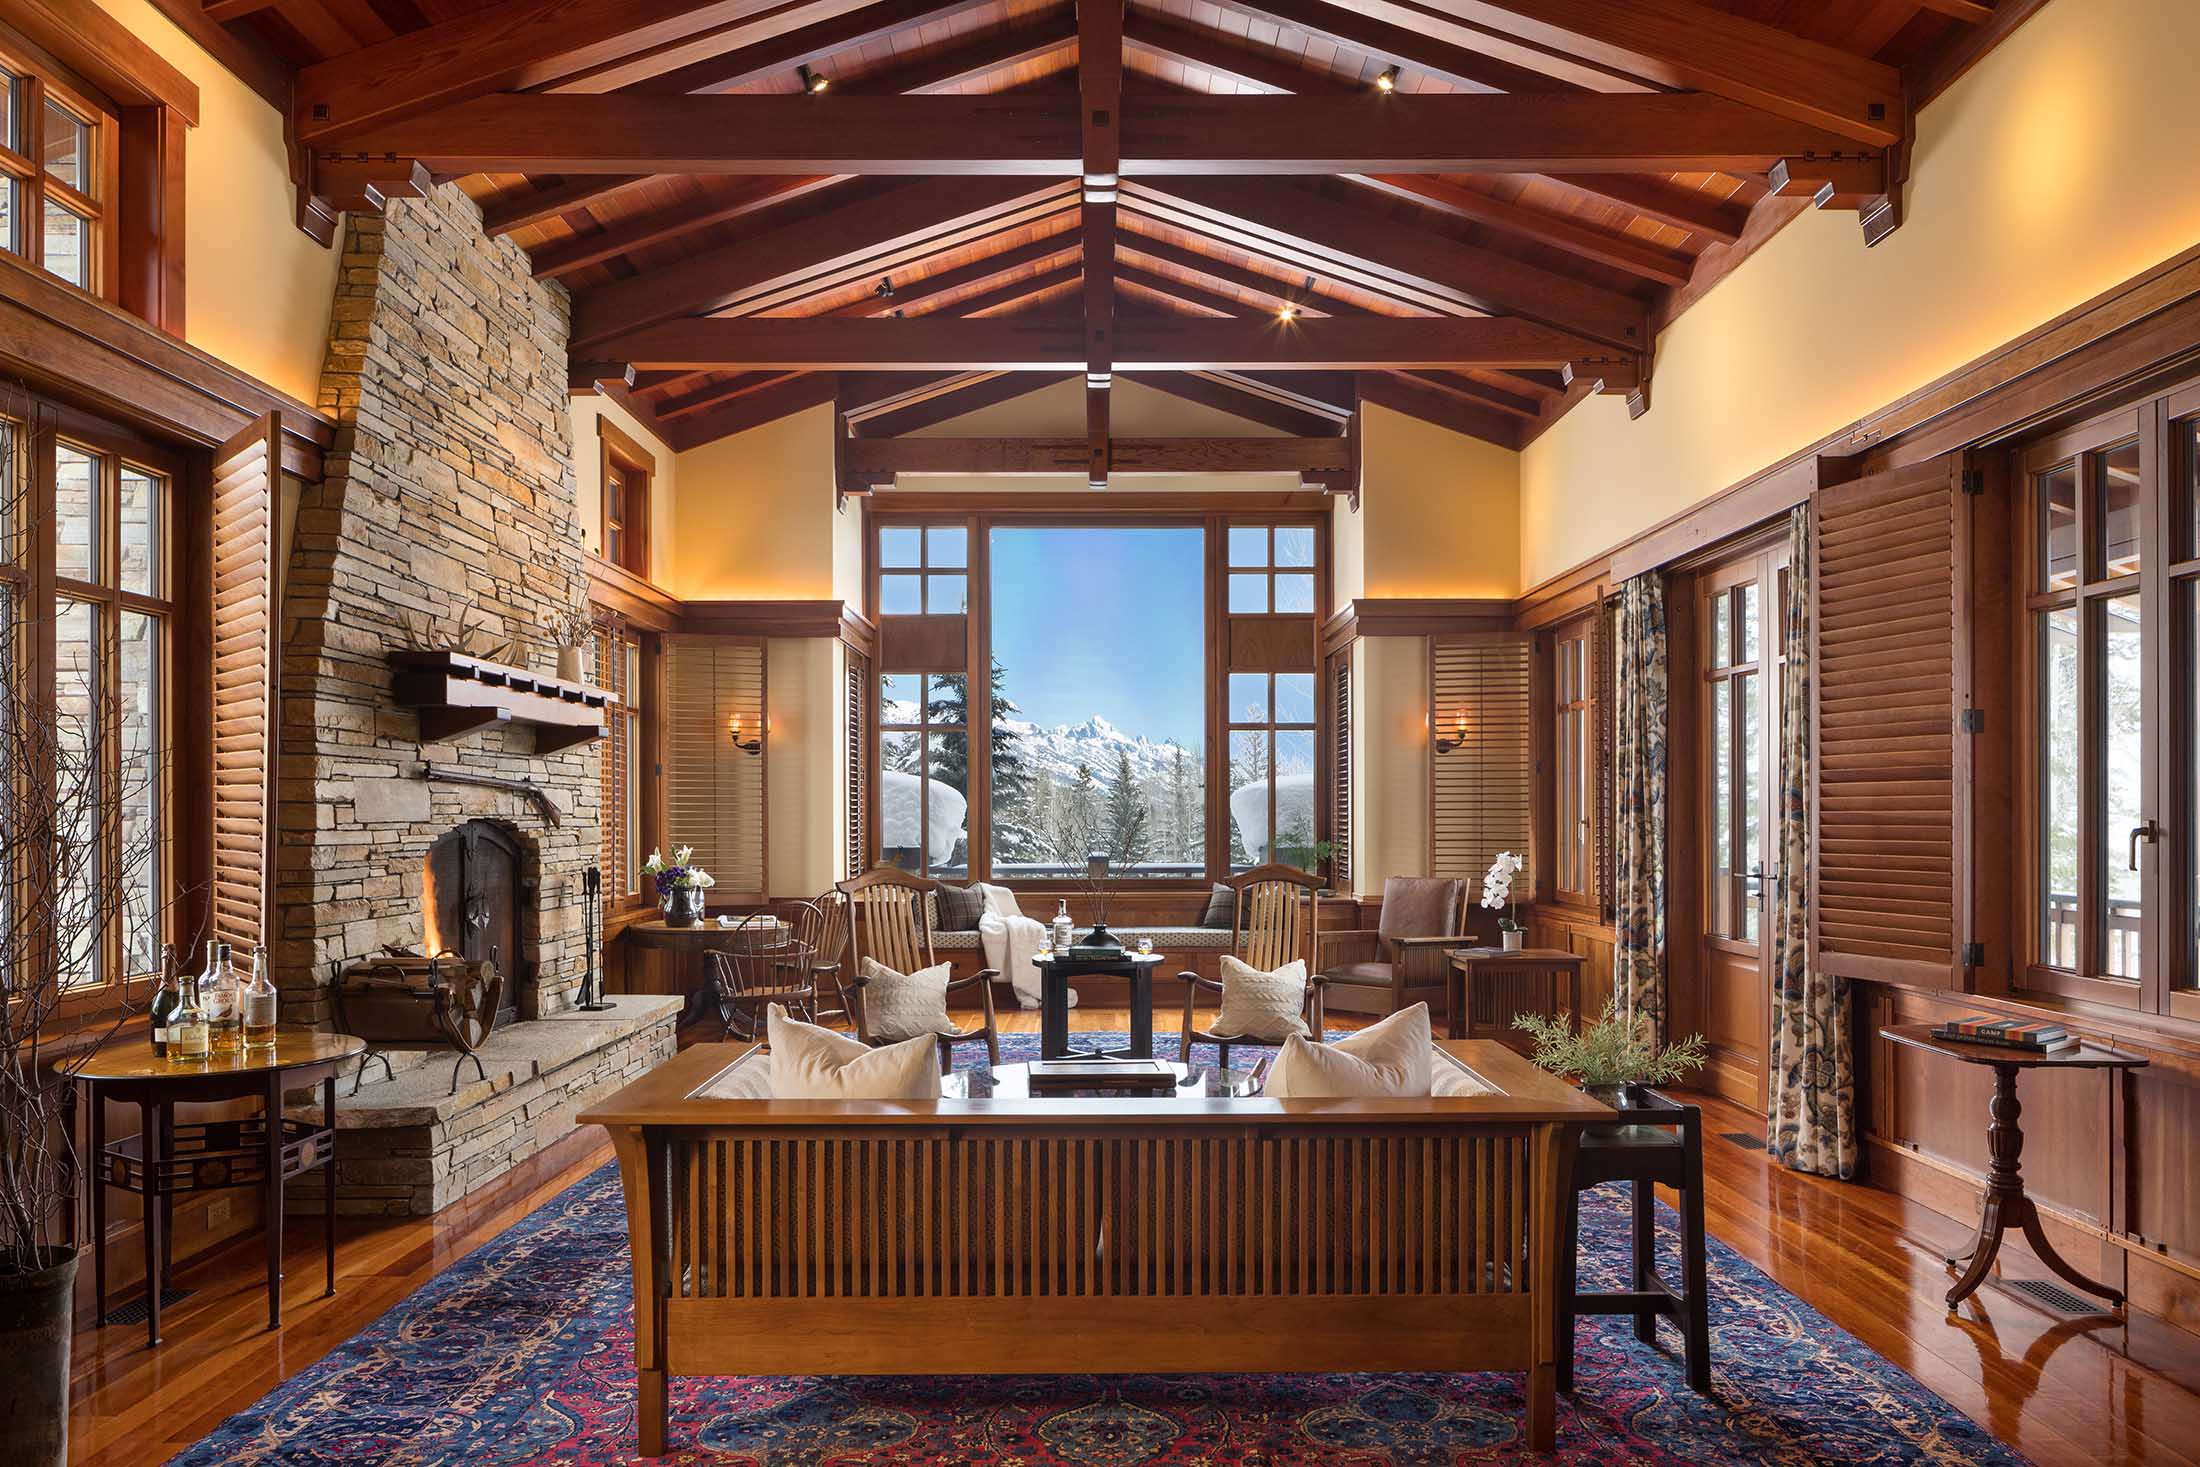 Crescent H Ranch - Jackson Hole Property for Sale